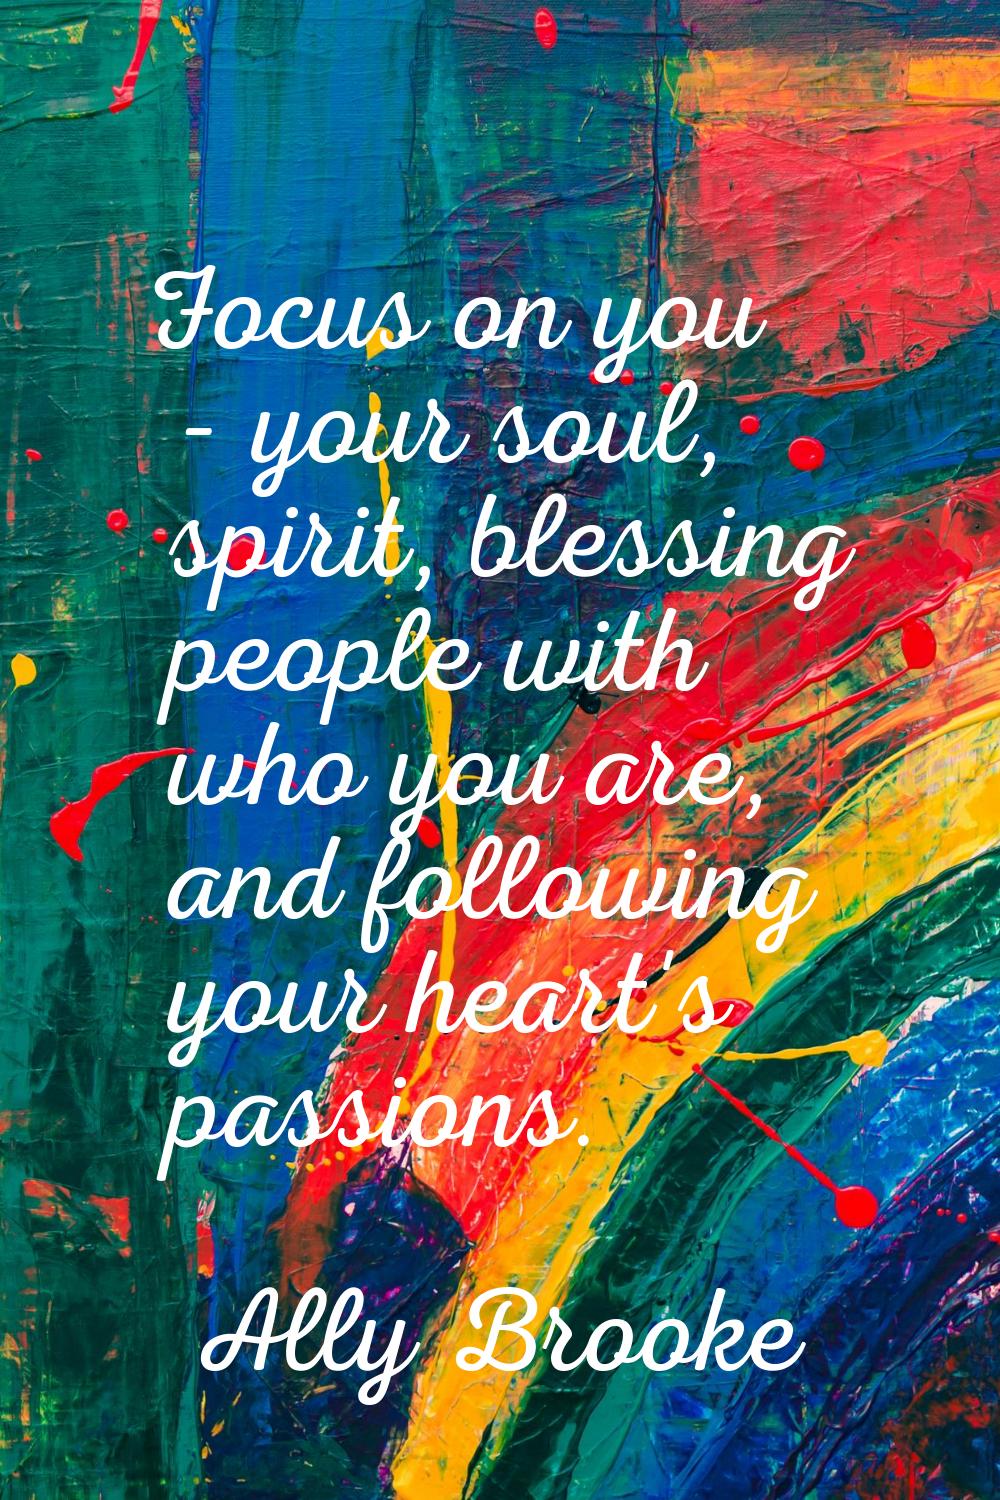 Focus on you - your soul, spirit, blessing people with who you are, and following your heart's pass